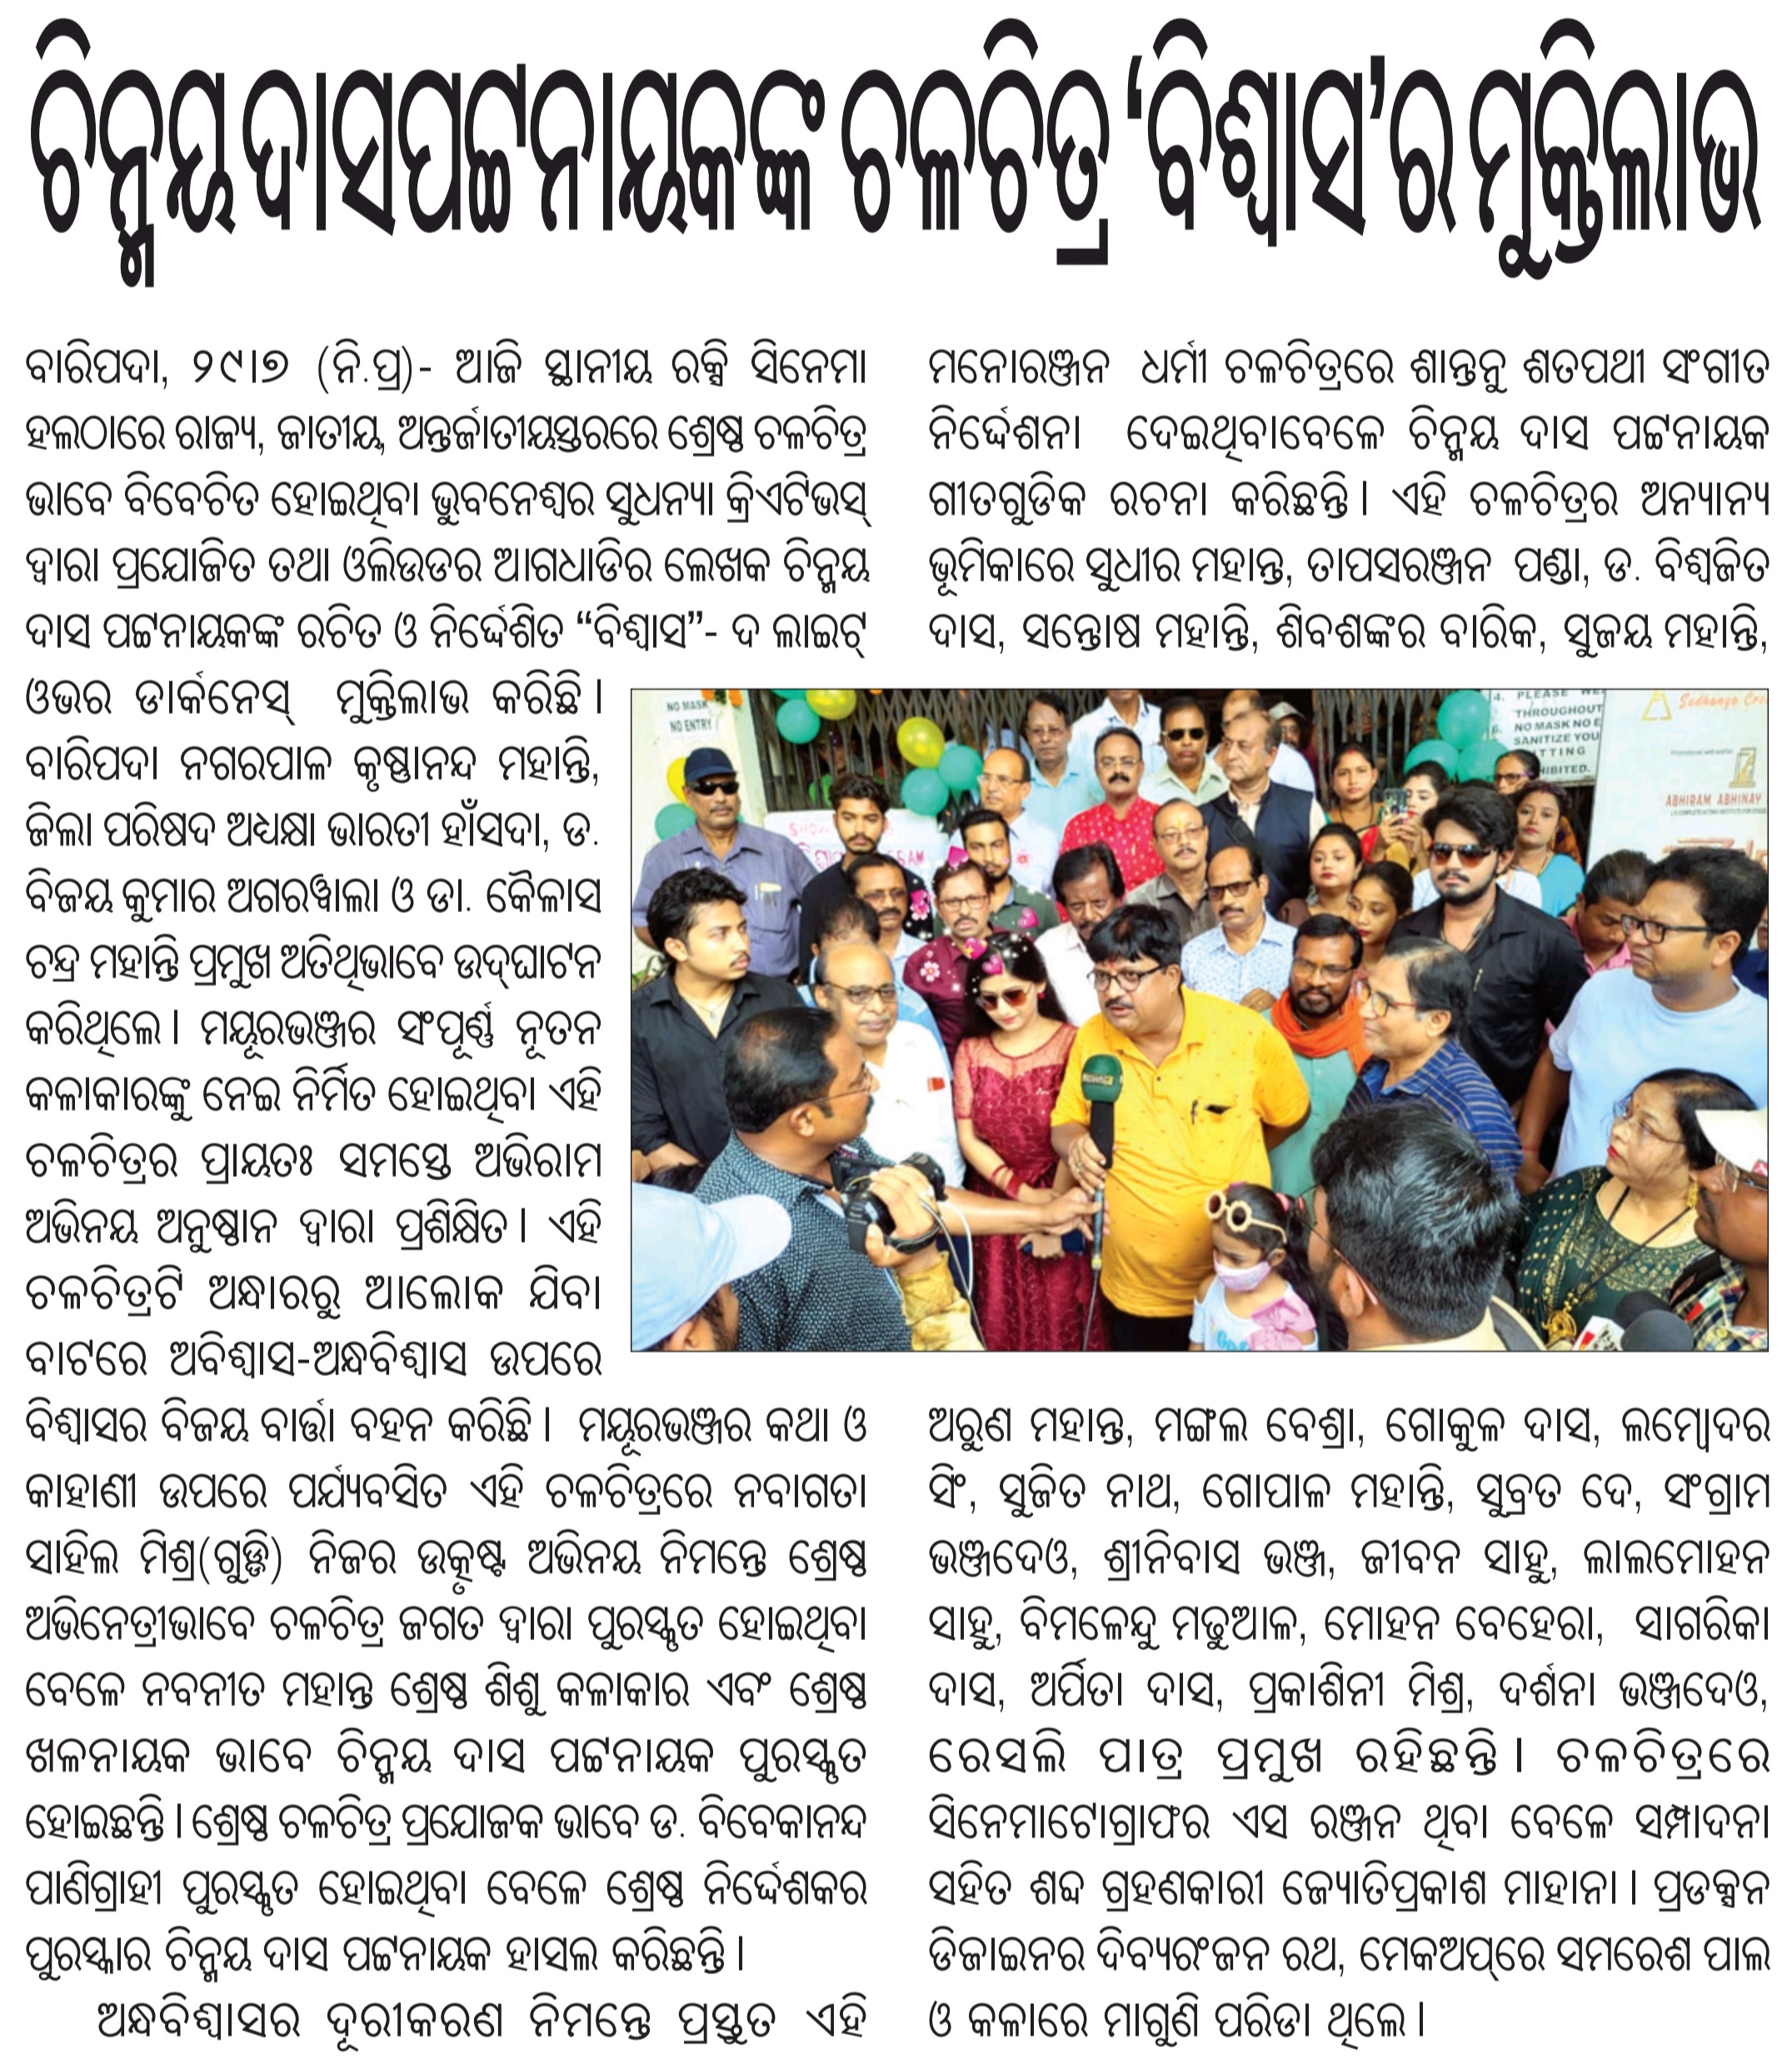 'Bishwaas - The Light Over Darkness' movie release news published in The Samaja, Baripada edition, Dt: 30 July 2022